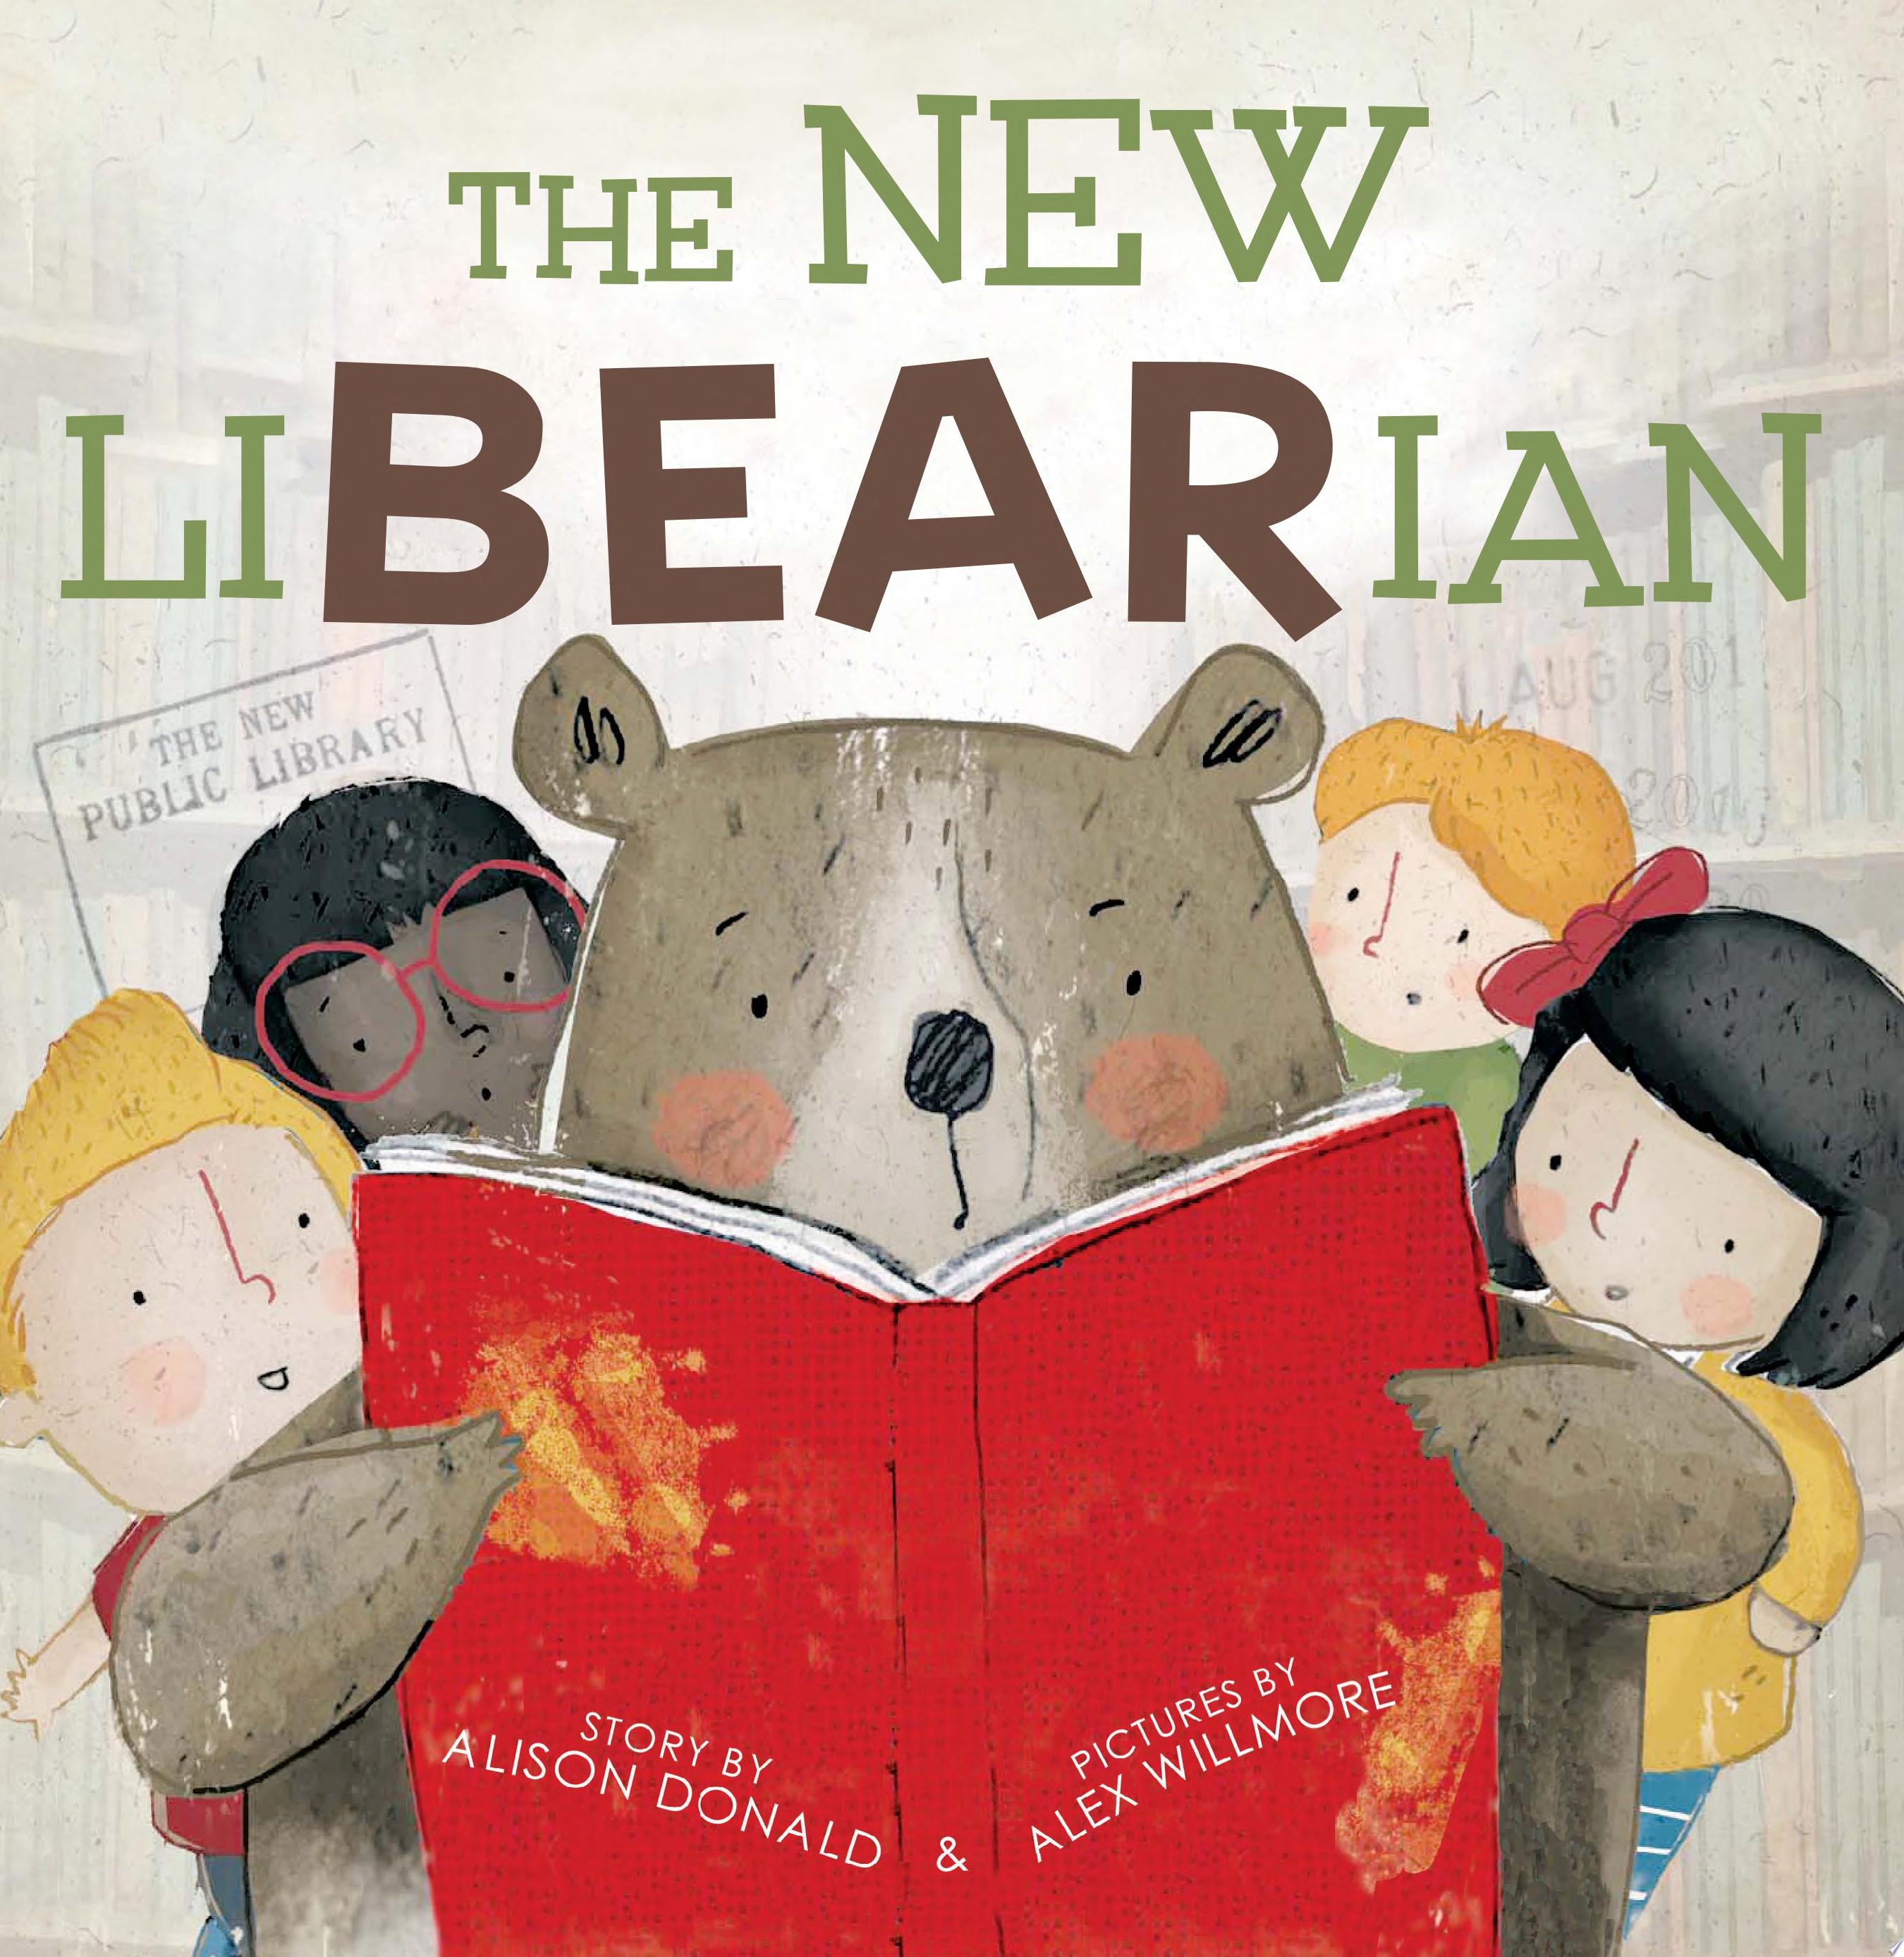 Image for "The New LiBEARian"